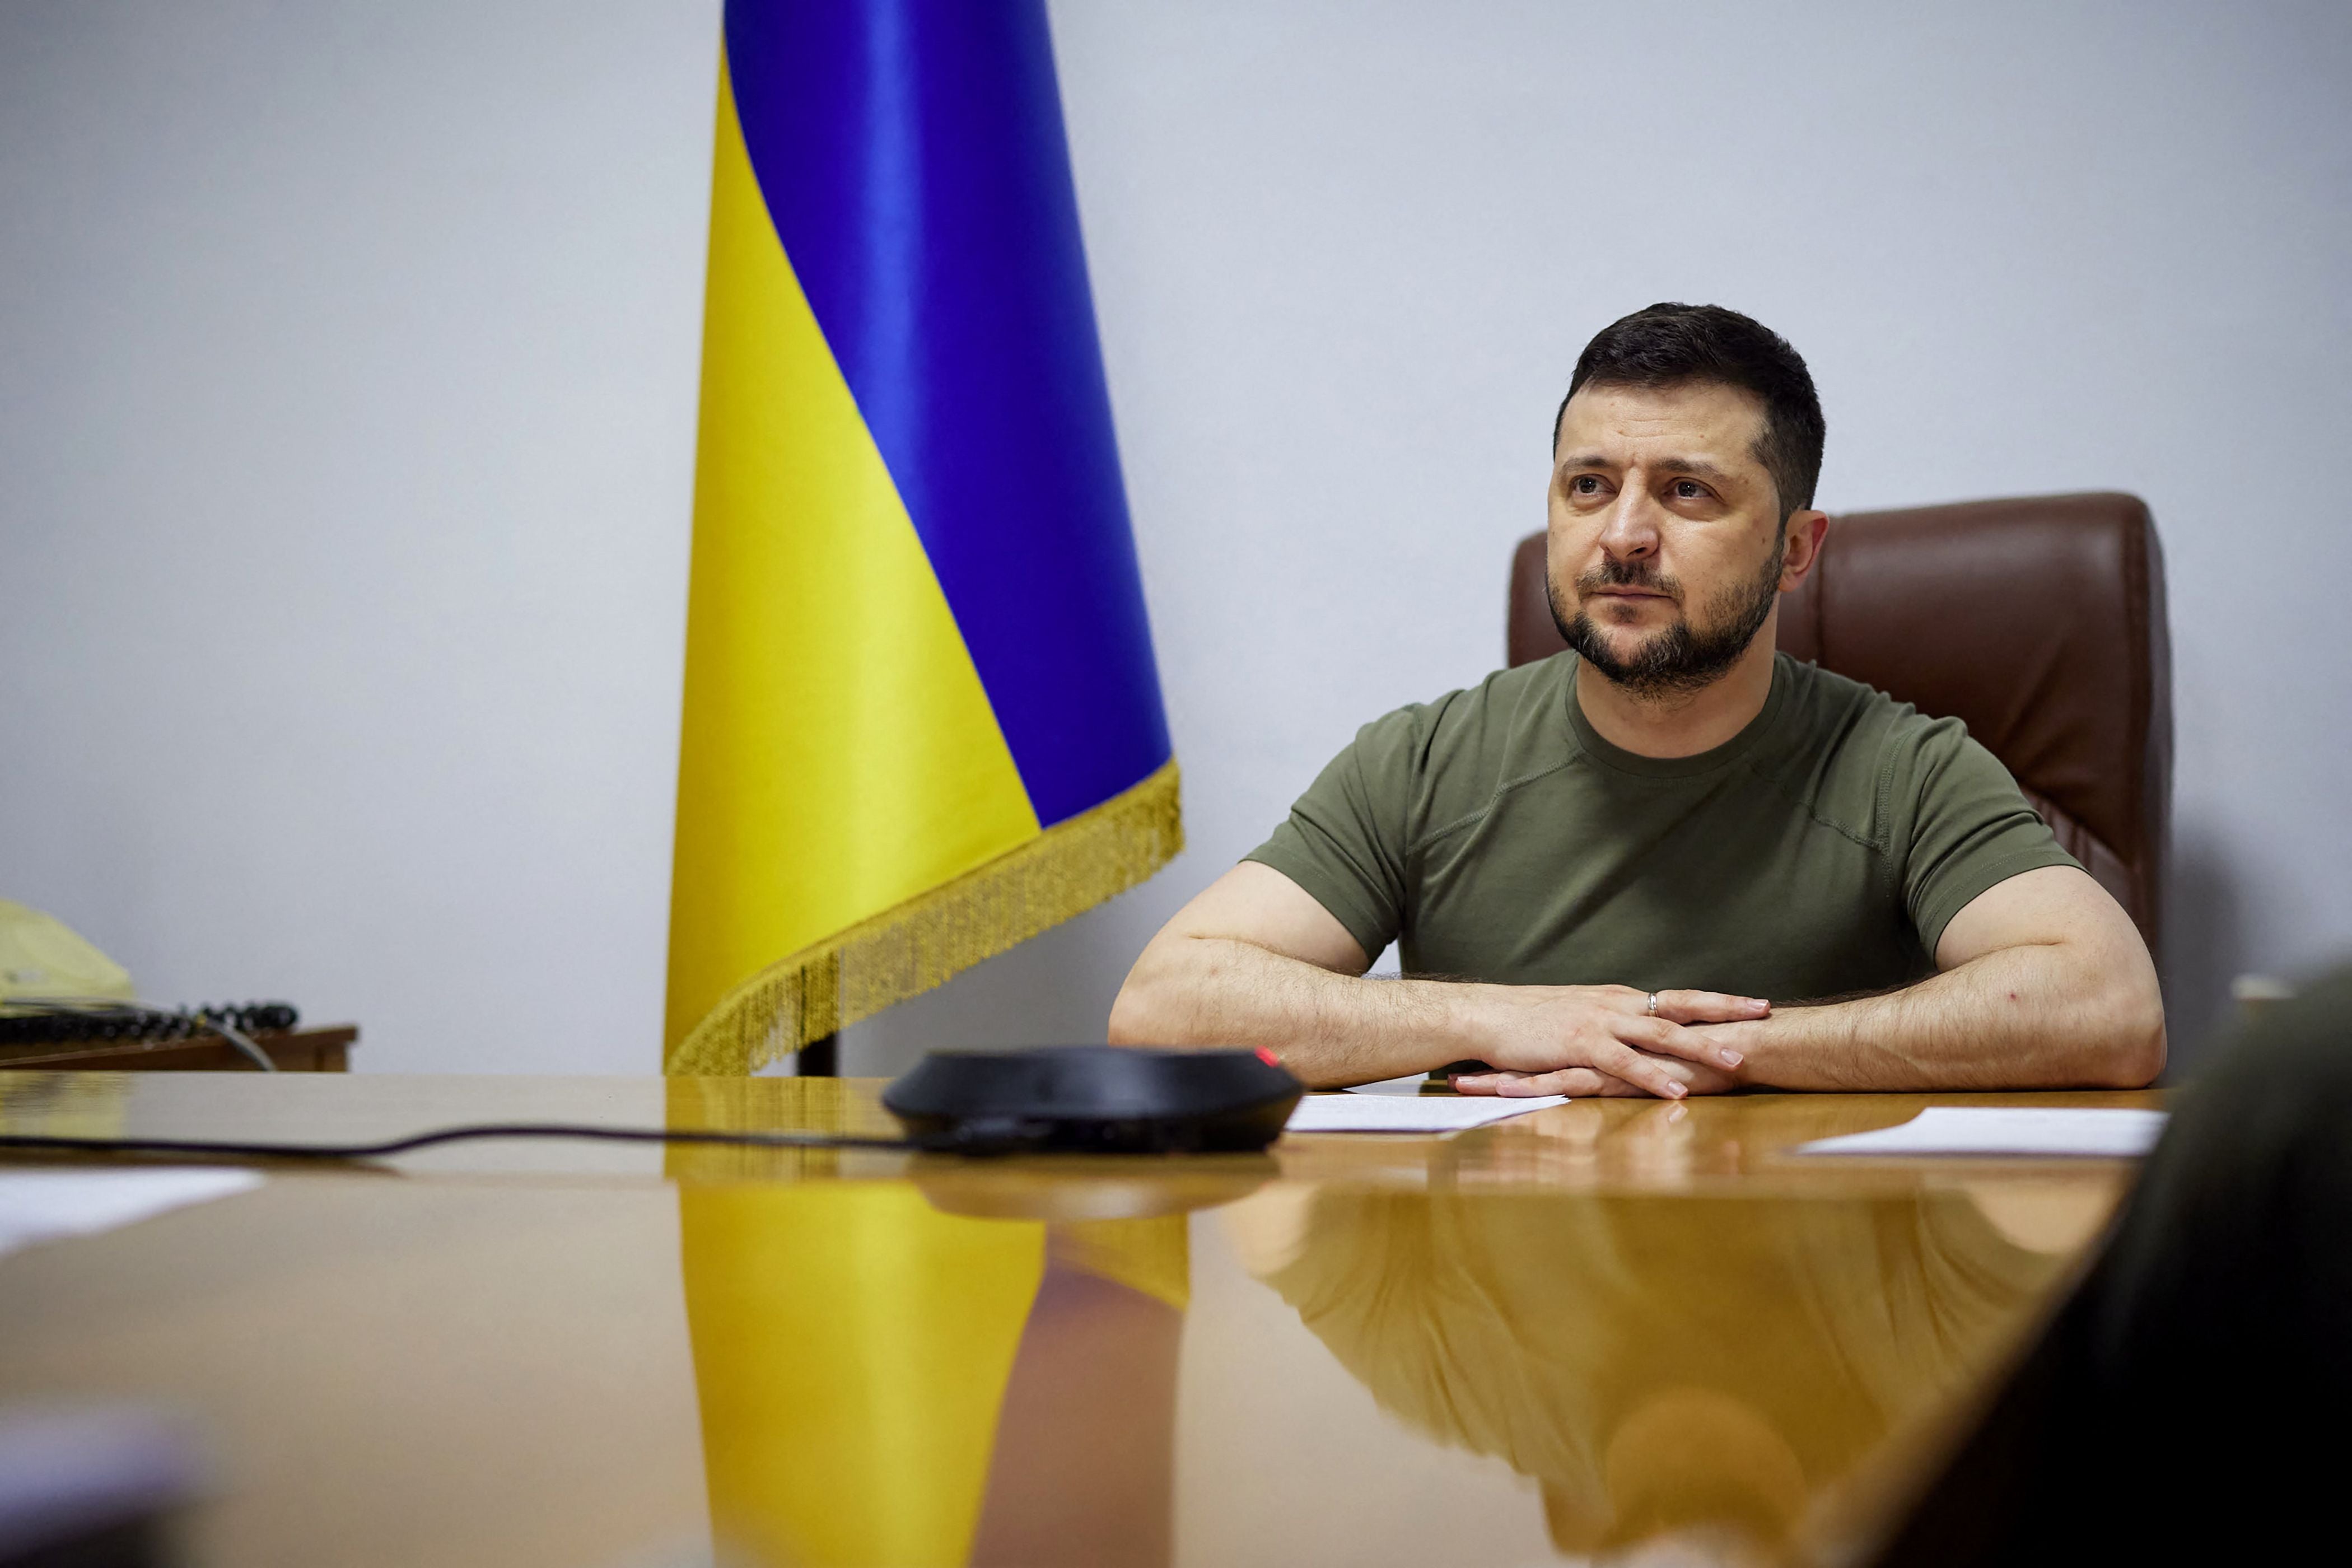 Zelensky, like his spy chief Budanov, is smart enough and shrewd enough to avoid any crude Russian traps